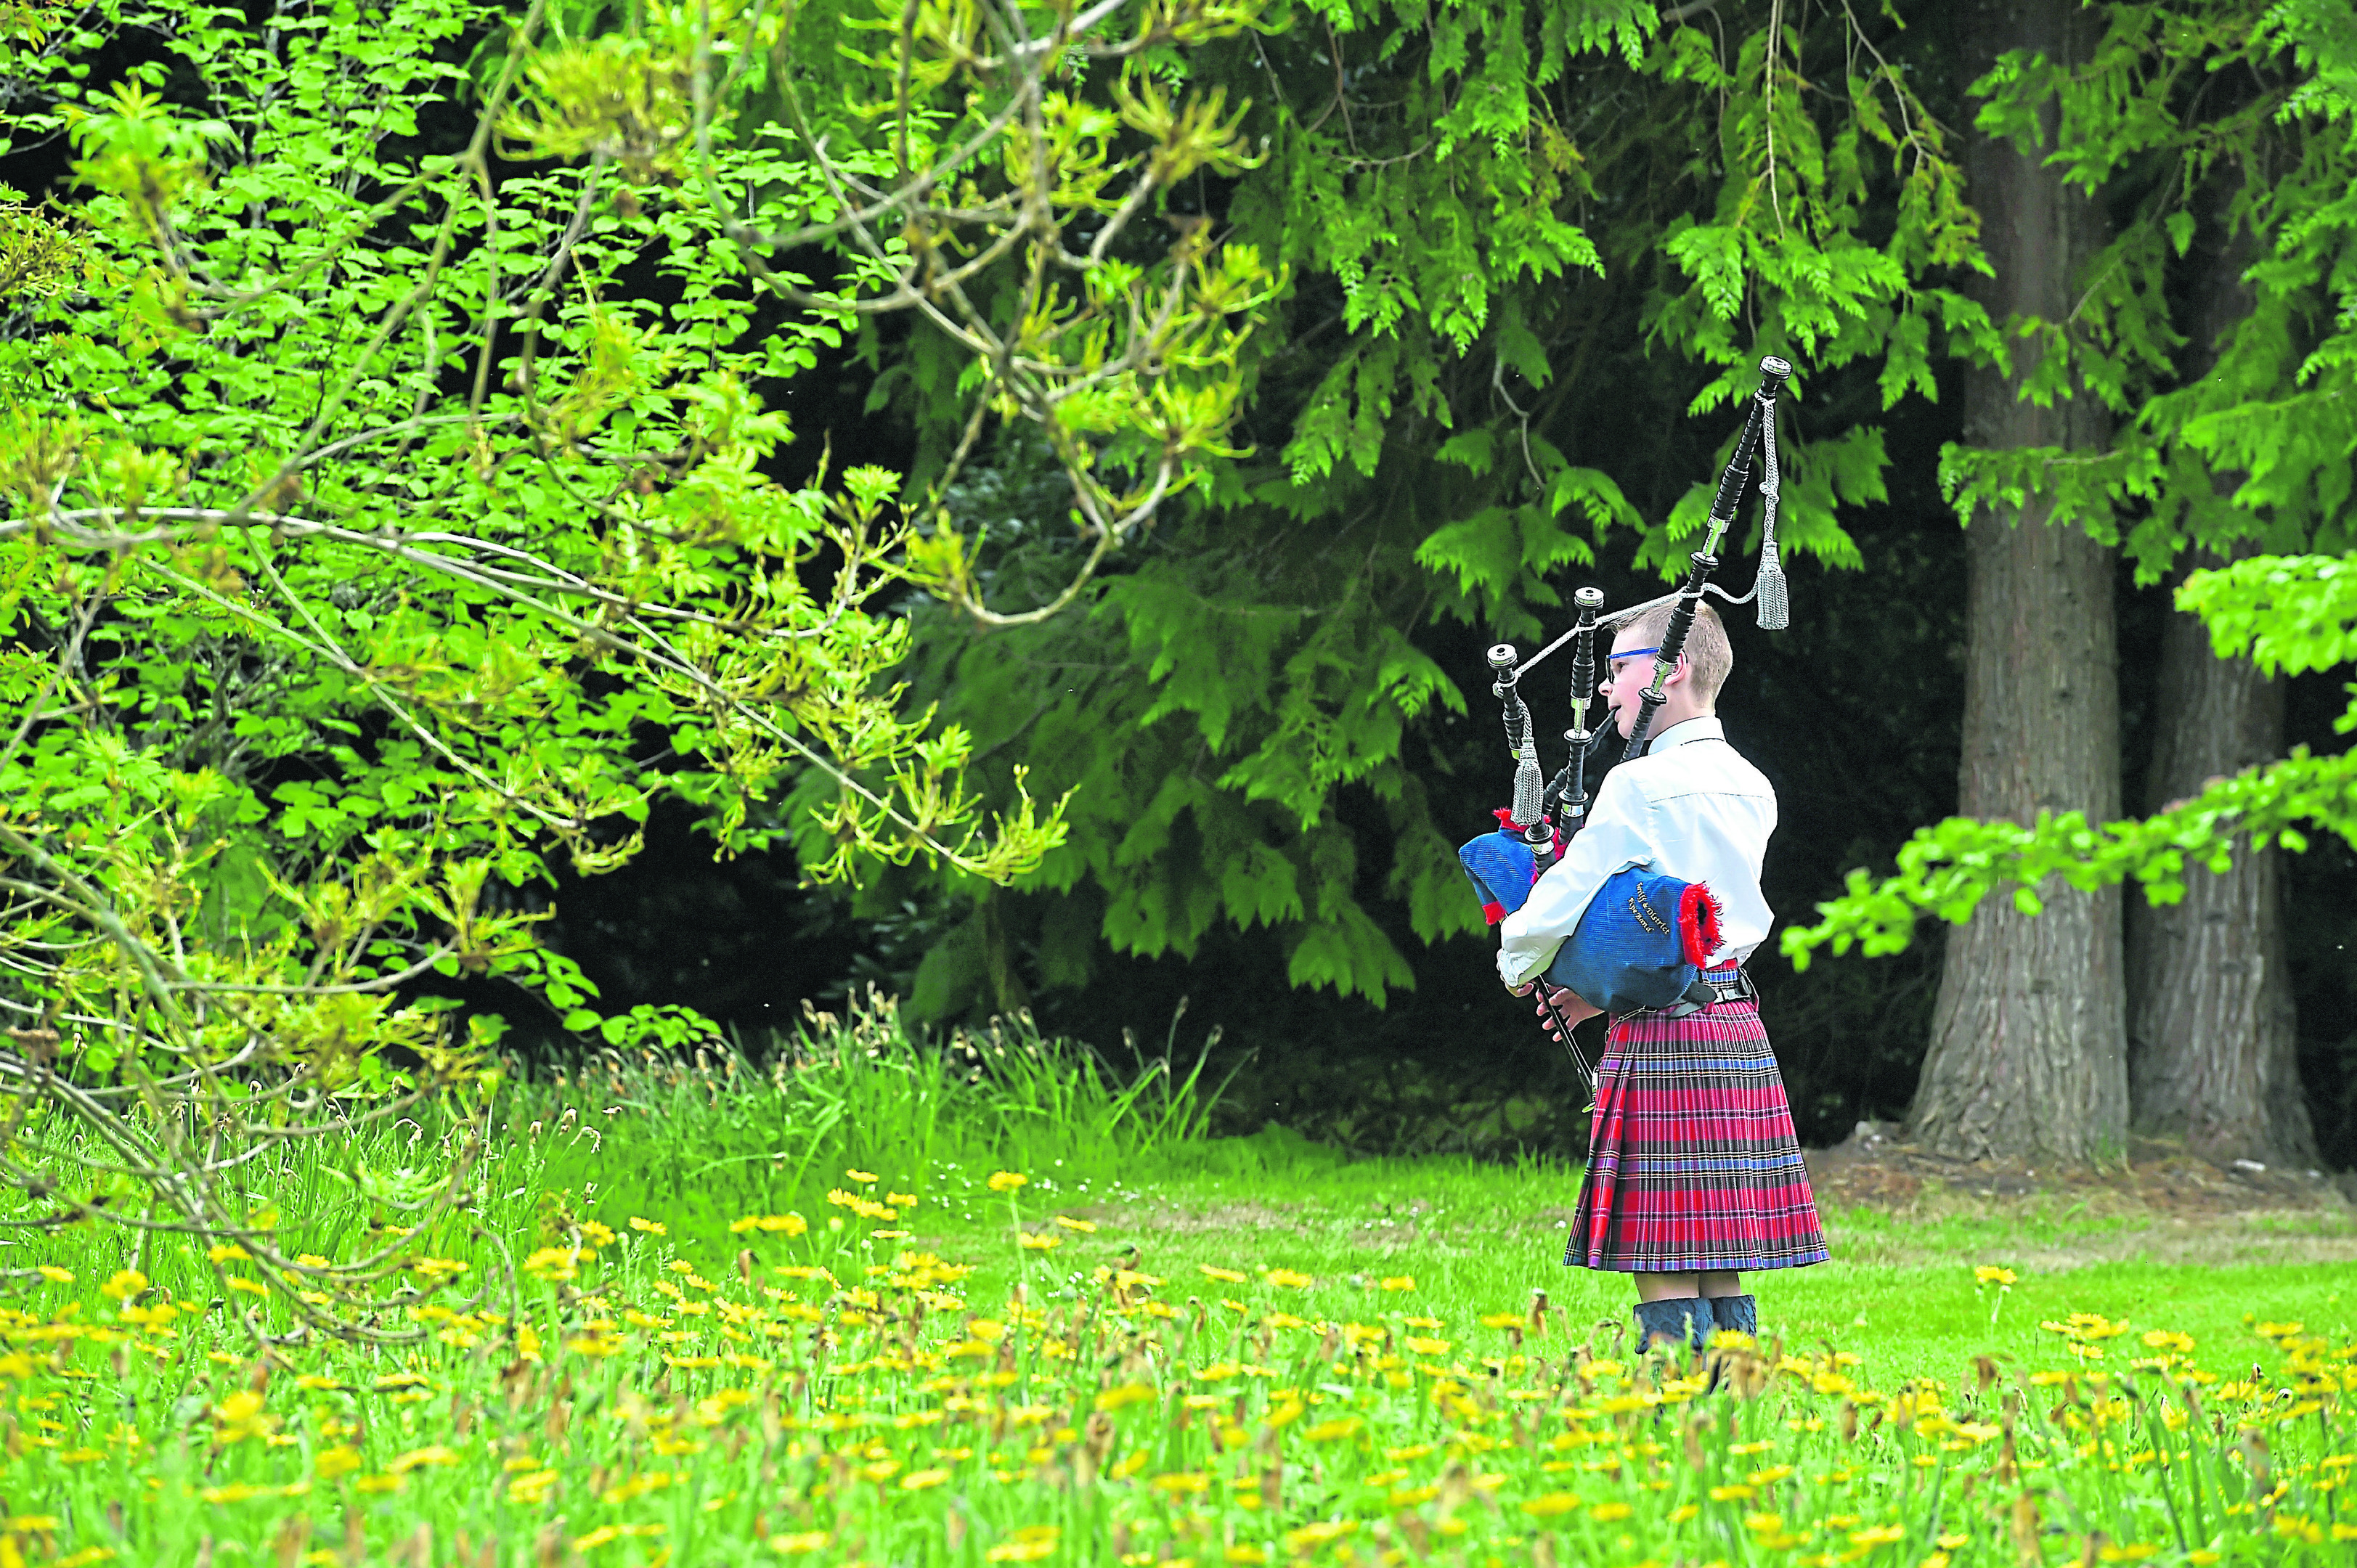 Pipers from as far afield as Canada, the US, New Zealand, Australia and Europe will gather in Inverness for piping competitions.